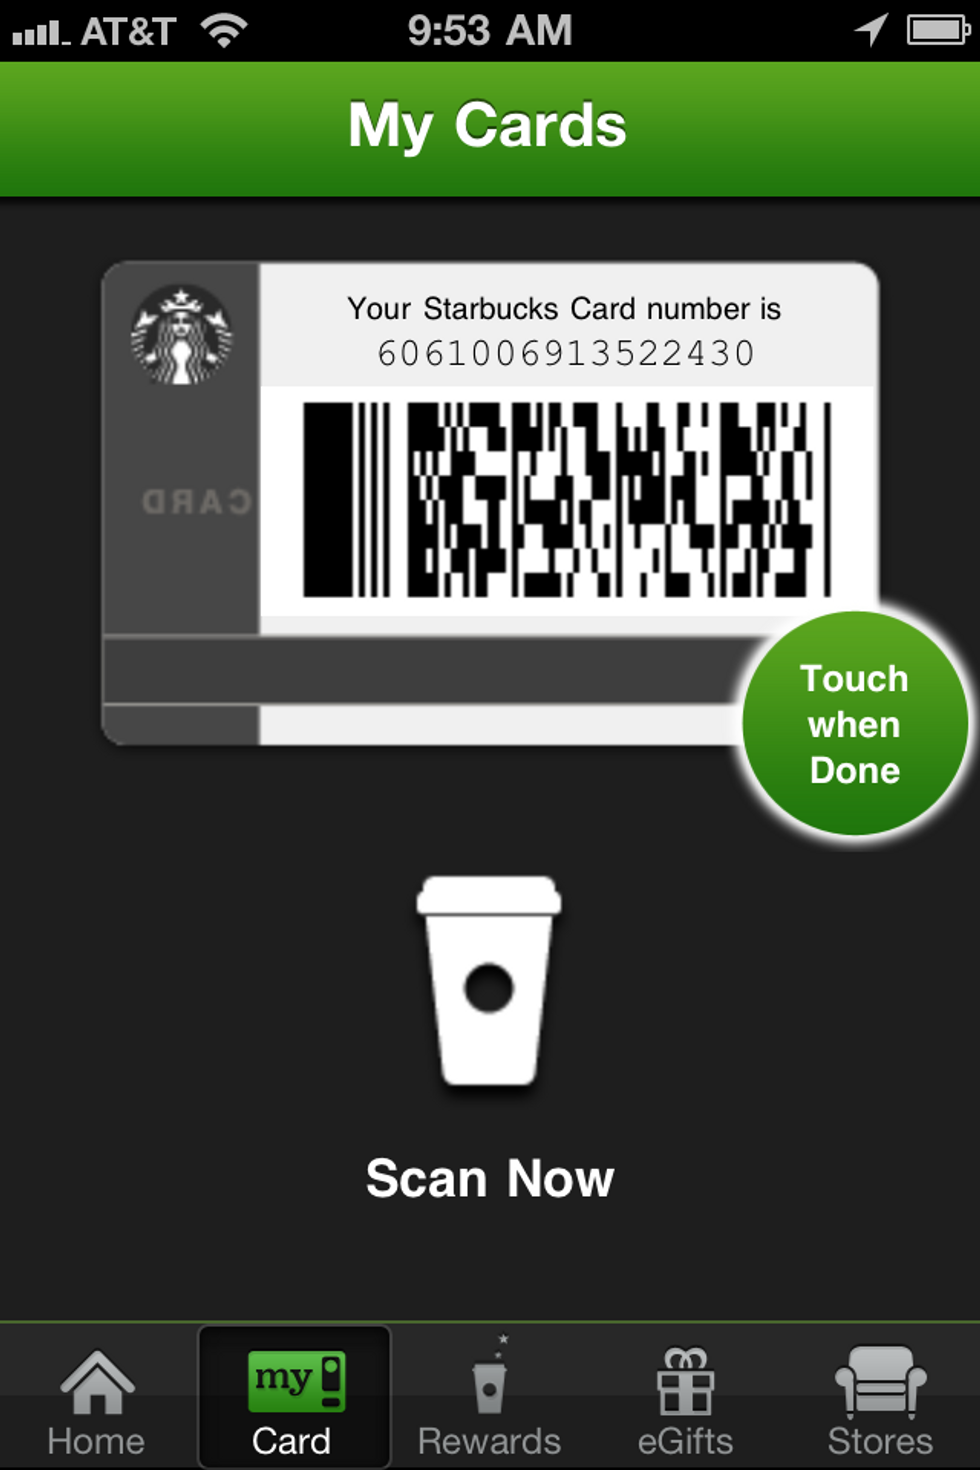 Radical Sharing Works This Guy Lets The World Use His Starbucks Card For Free Updated Good